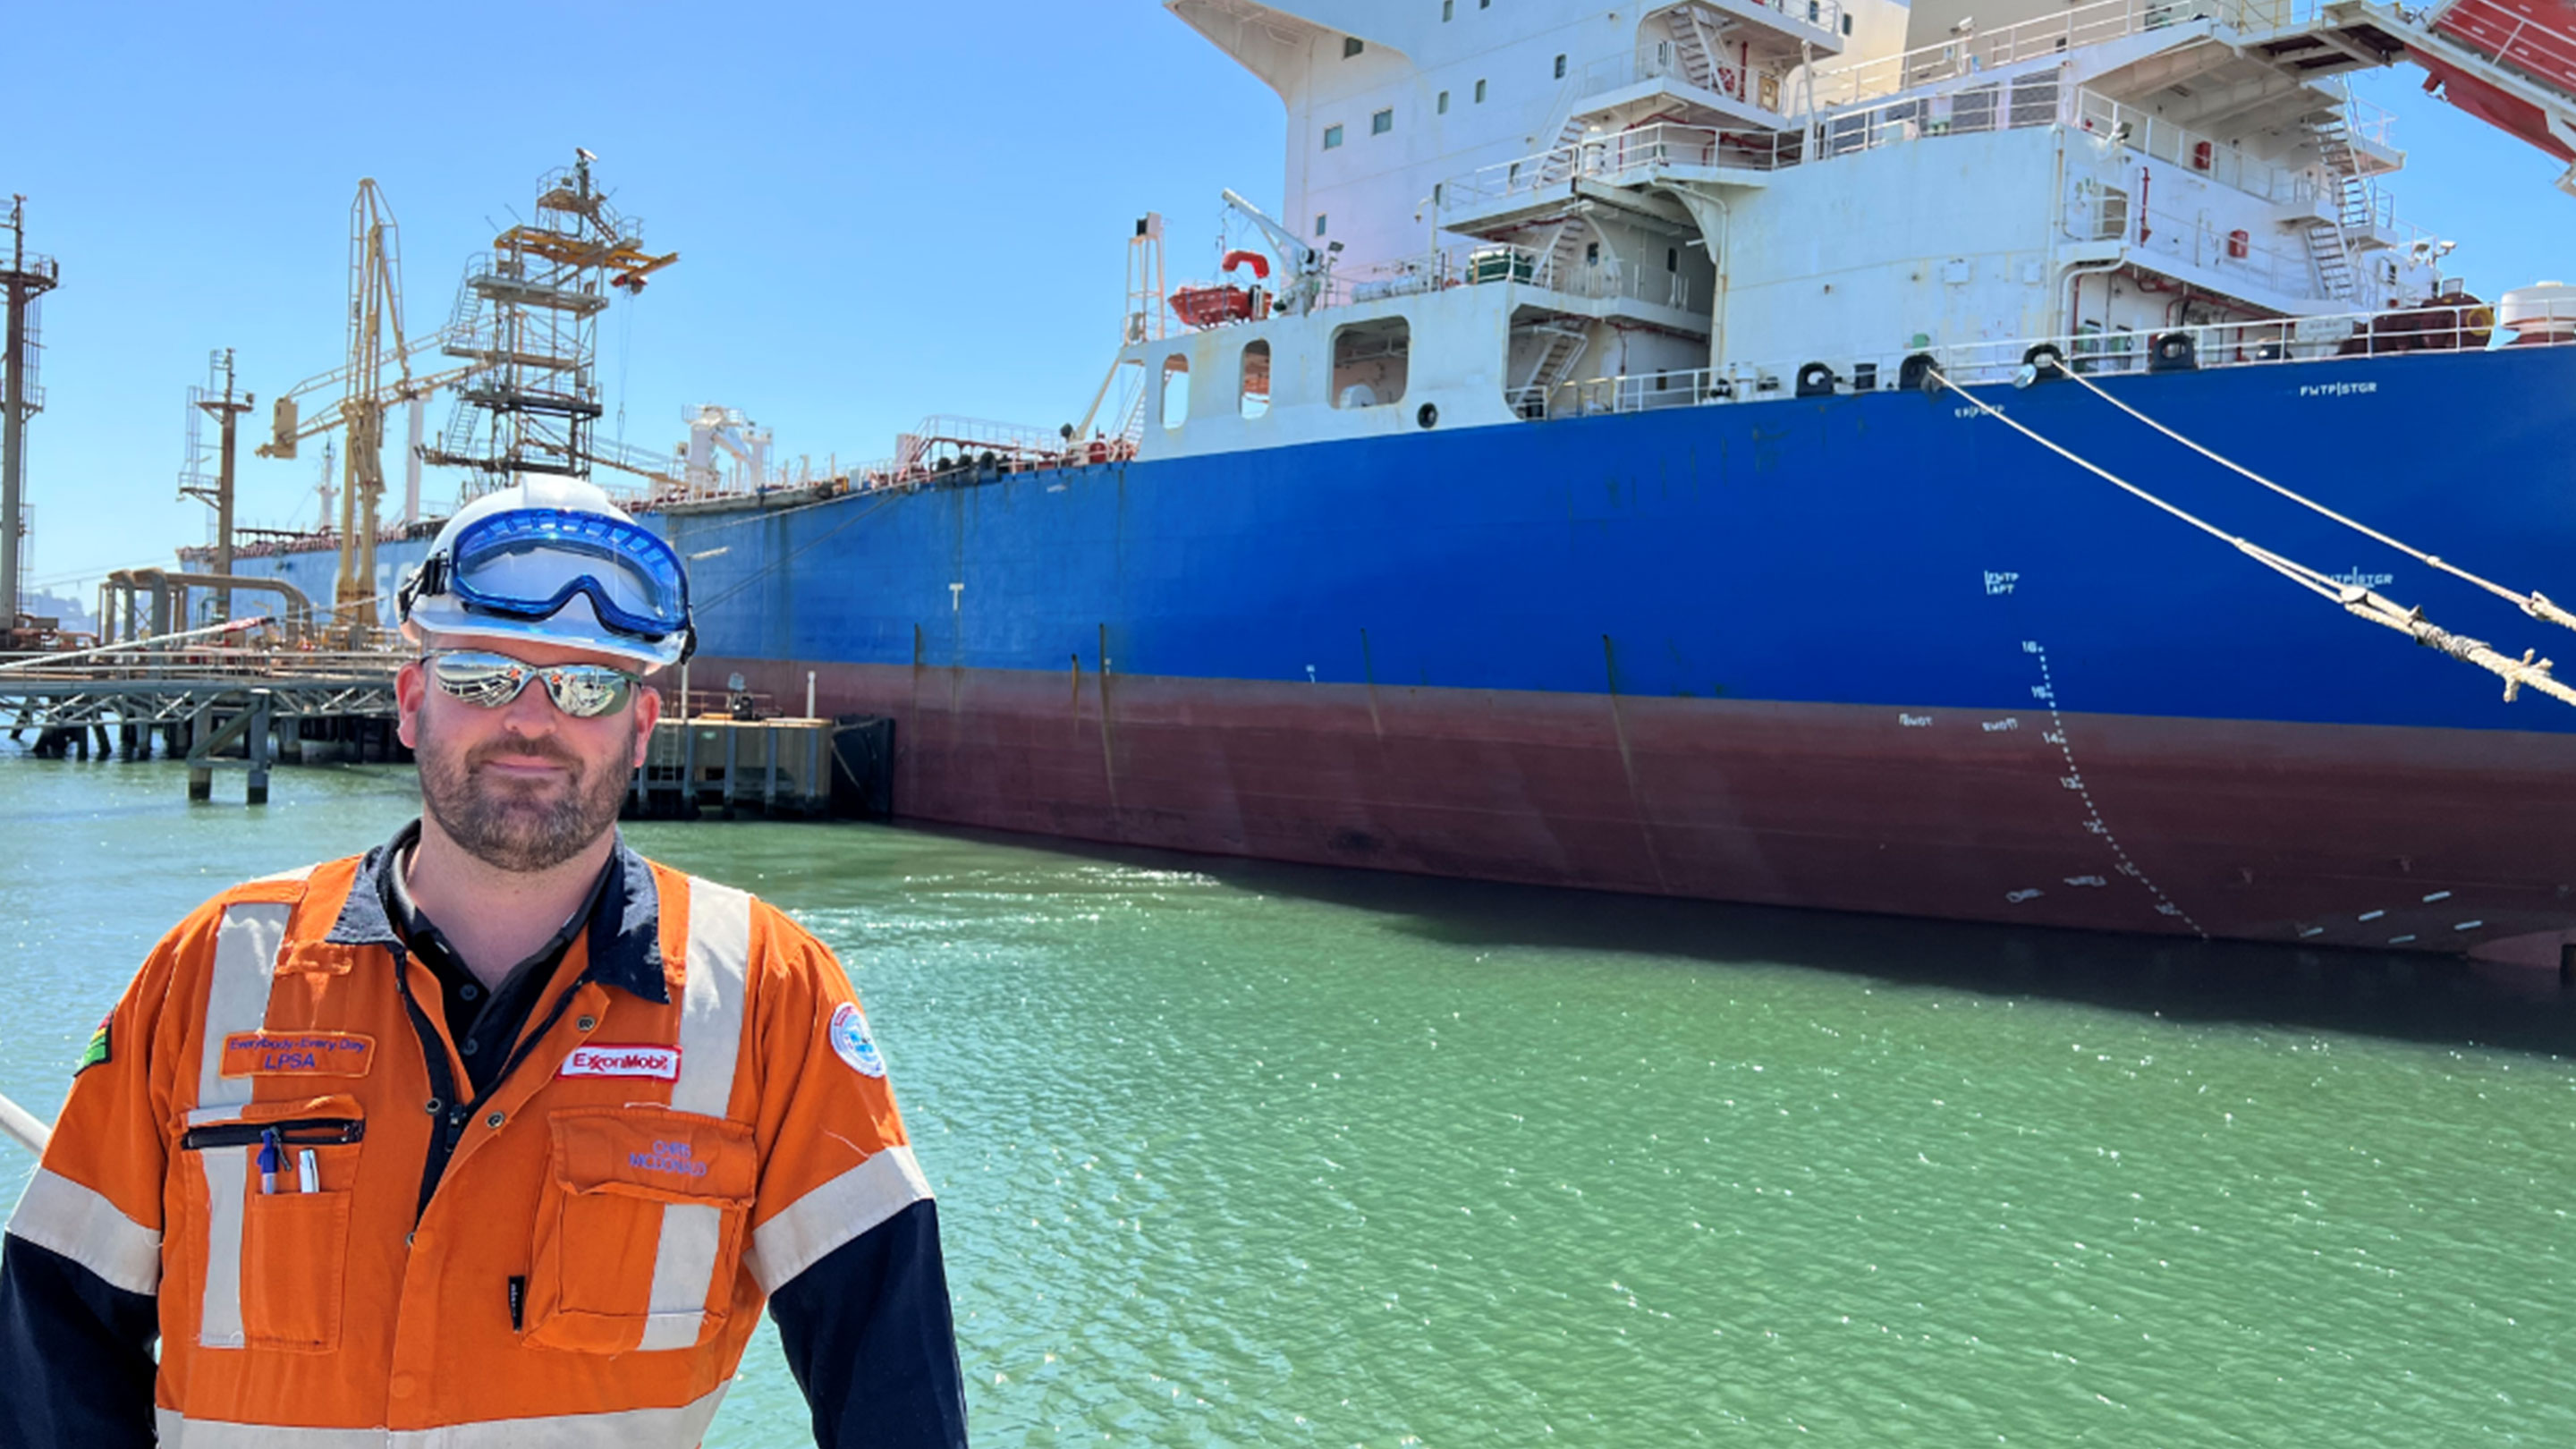 Update from the Mobil Altona fuel terminal